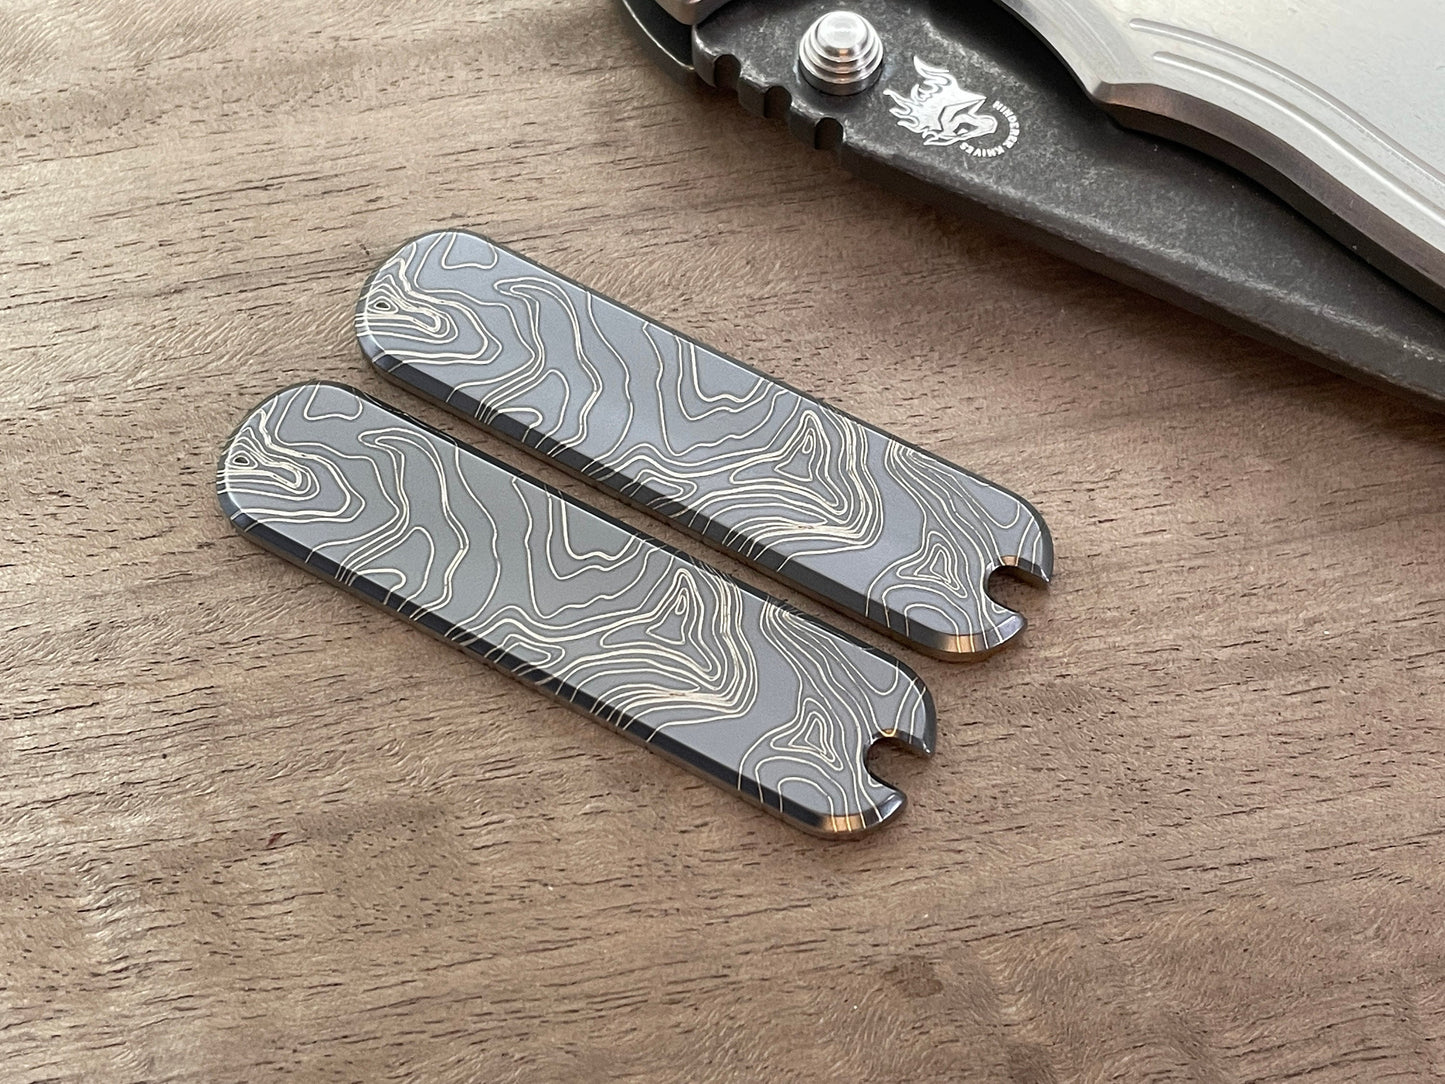 MetonBoss 58mm Titanium Swiss Army Knife Scales, Black Heat Anodized  Topographic Engraved, Knife Not Included - KnifeCenter